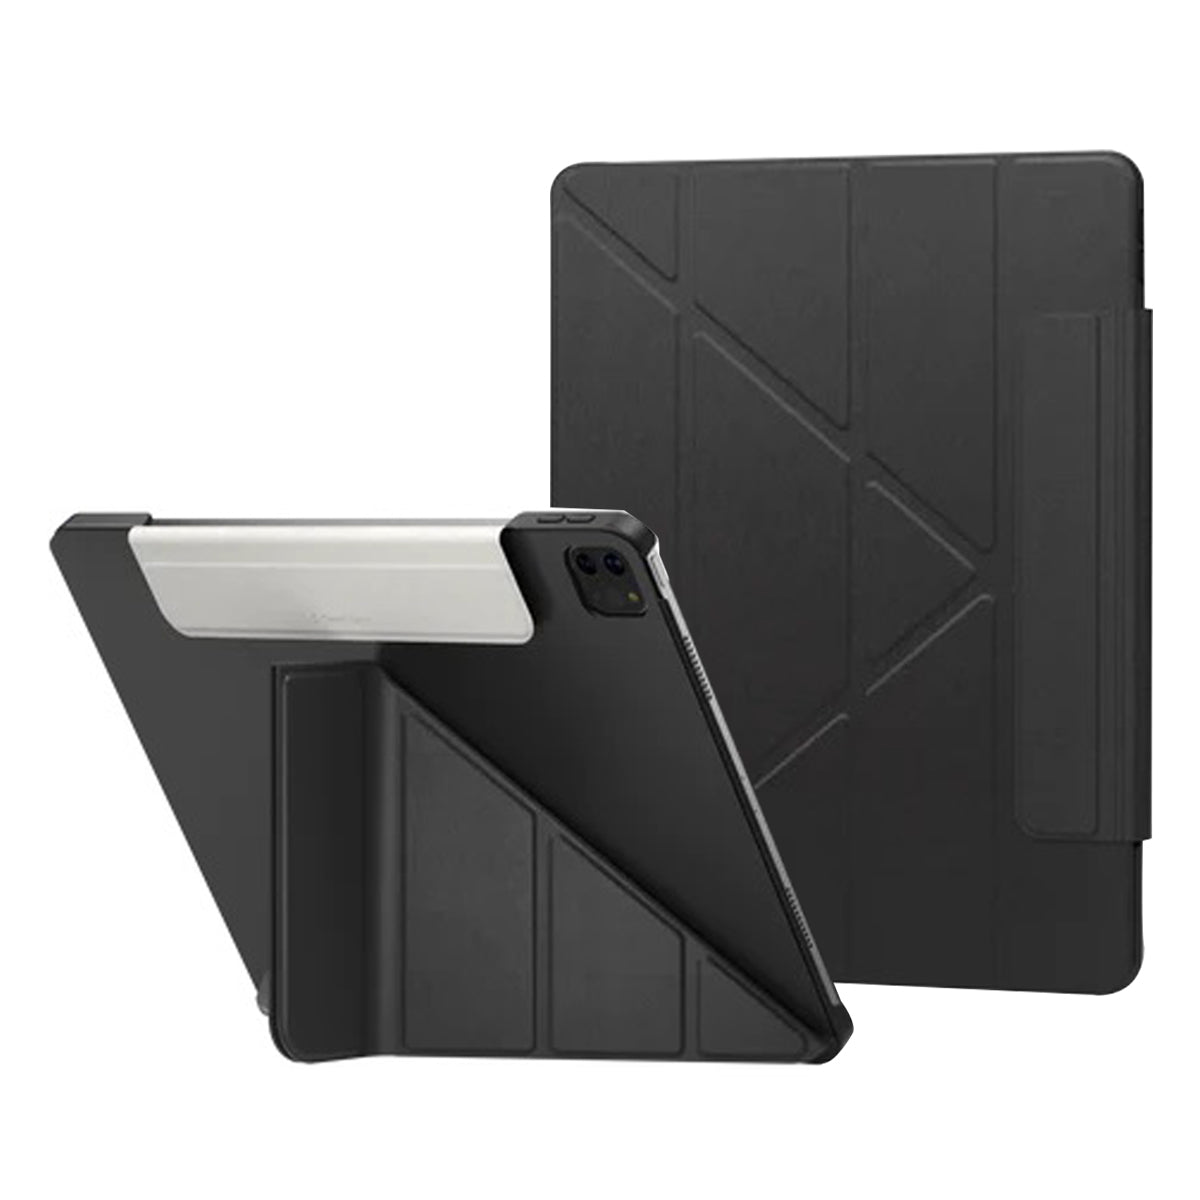 SwitchEasy Origami Protective Case For iPad Pro 11″/ Air 4 2020-2021